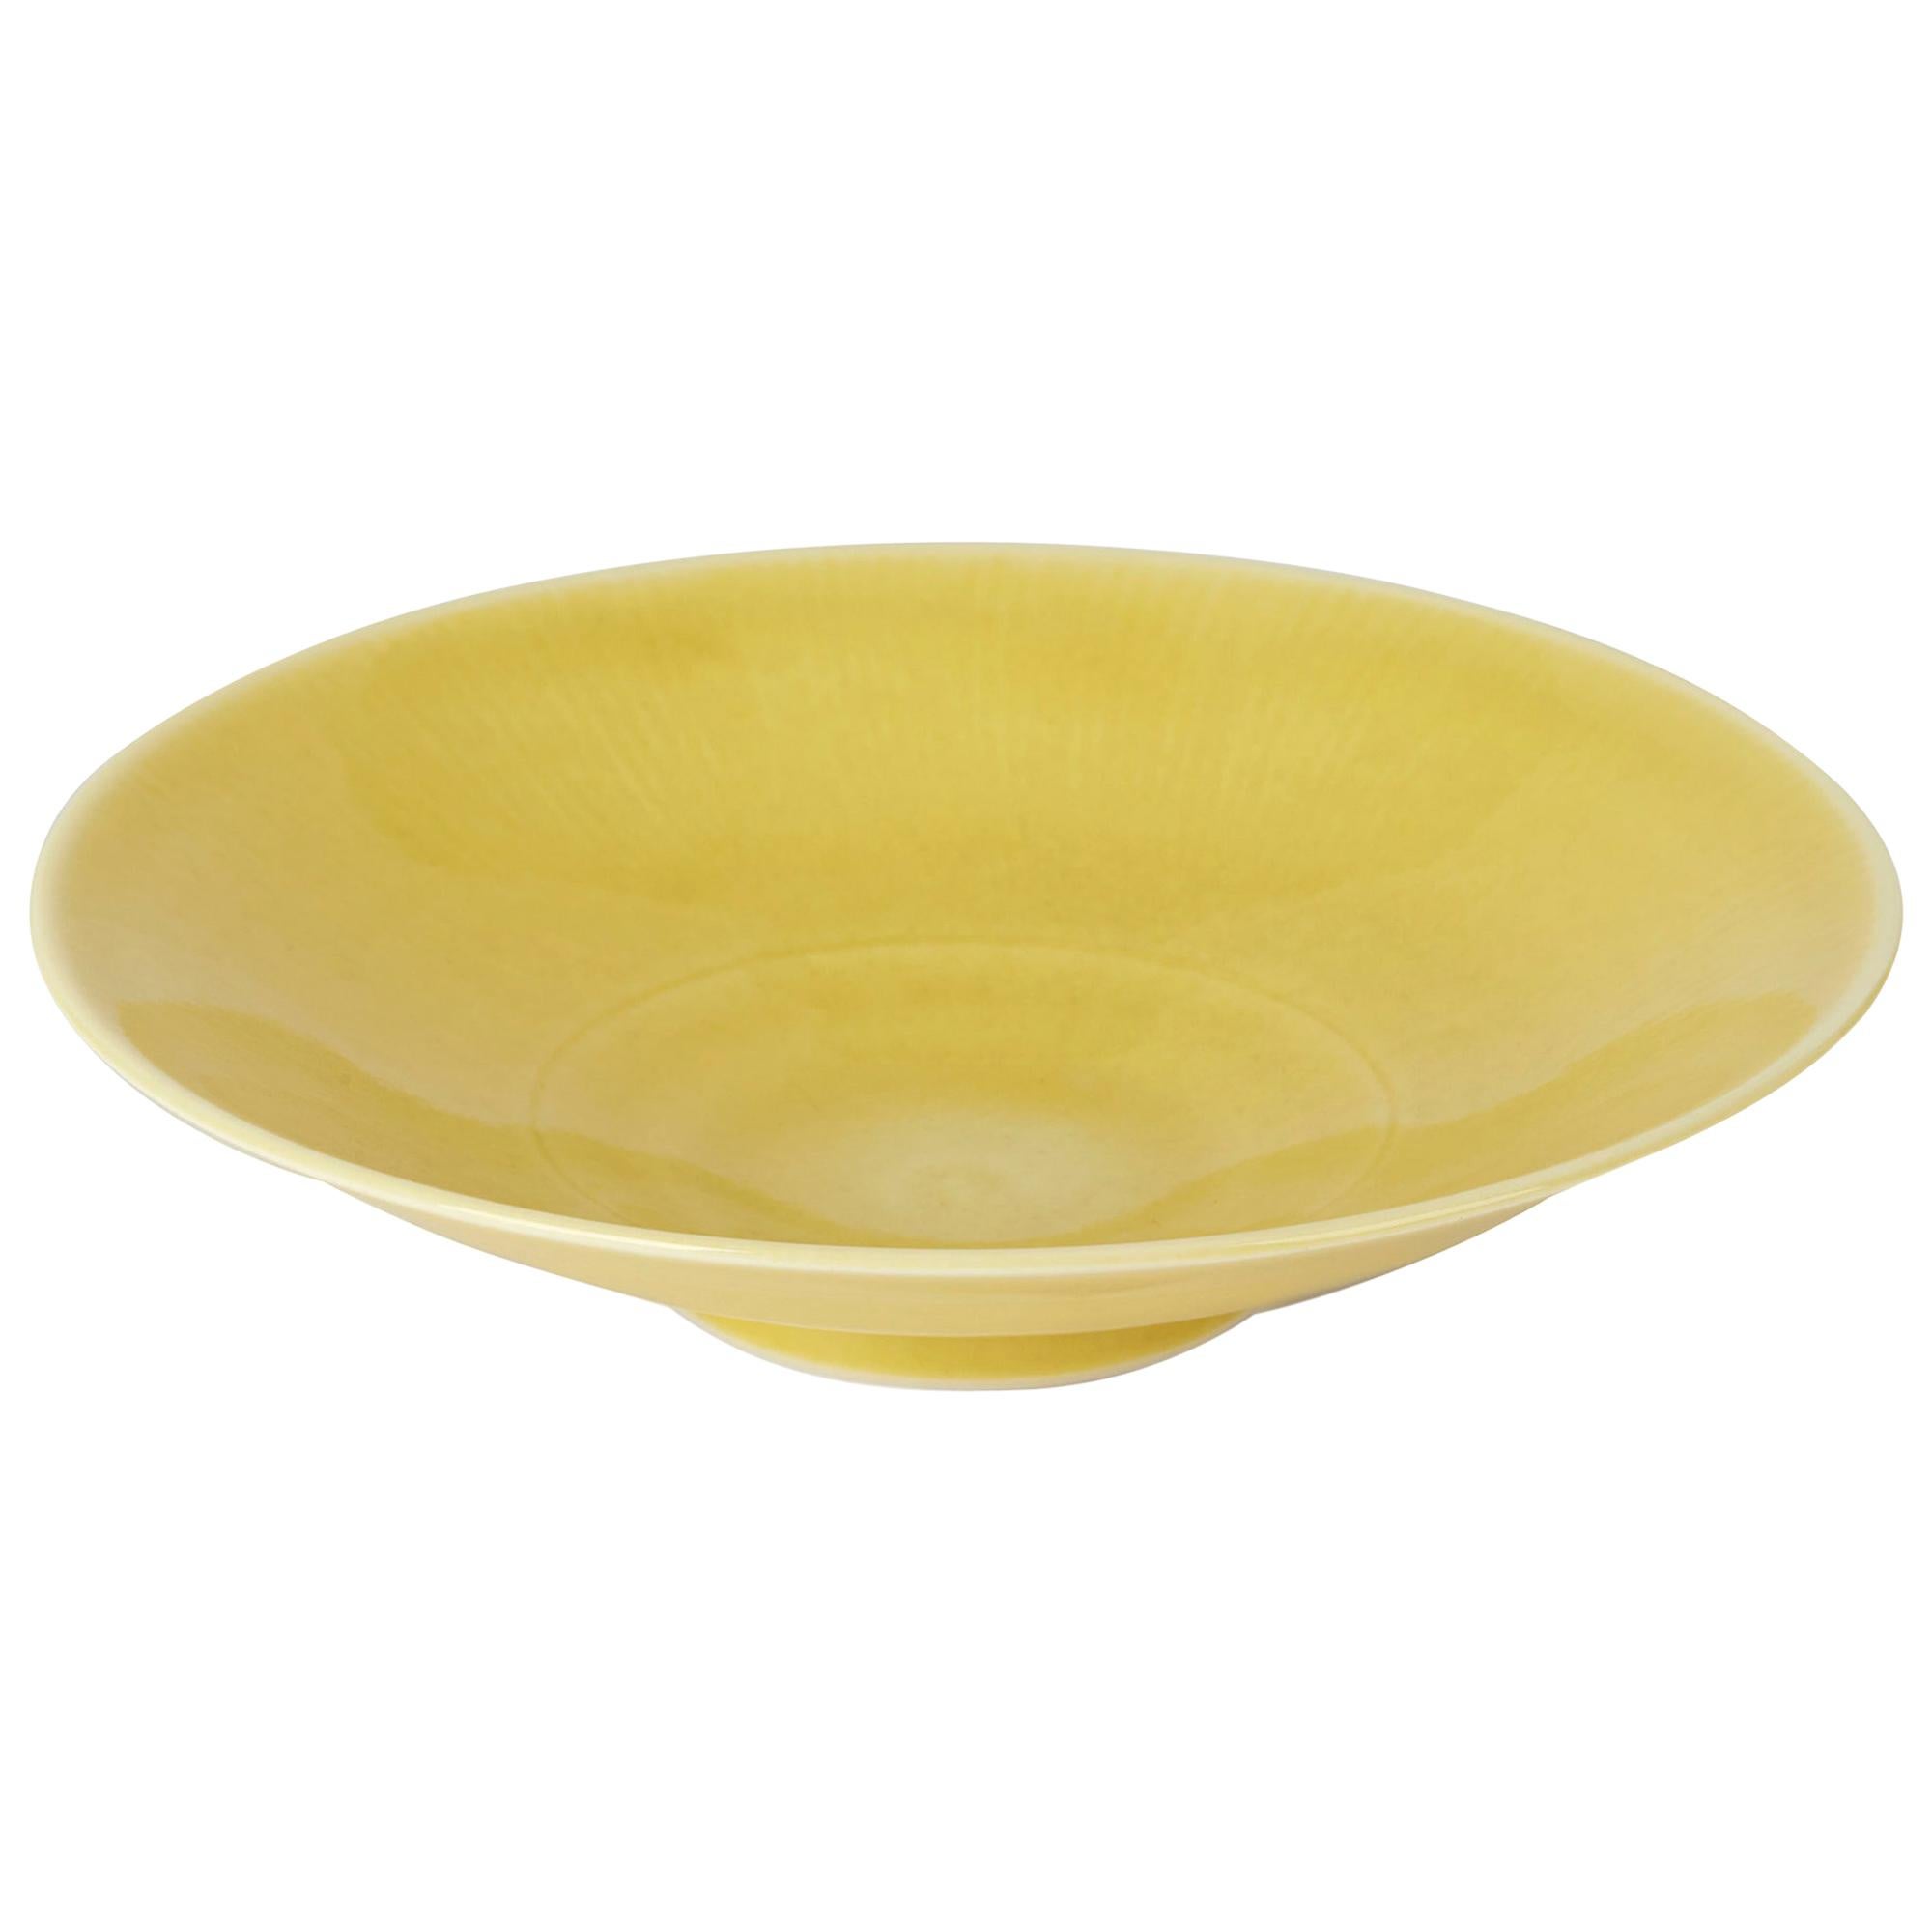 William Mehornay Studio Pottery Porcelain Mustard Chatter Bowl, 1995 For Sale